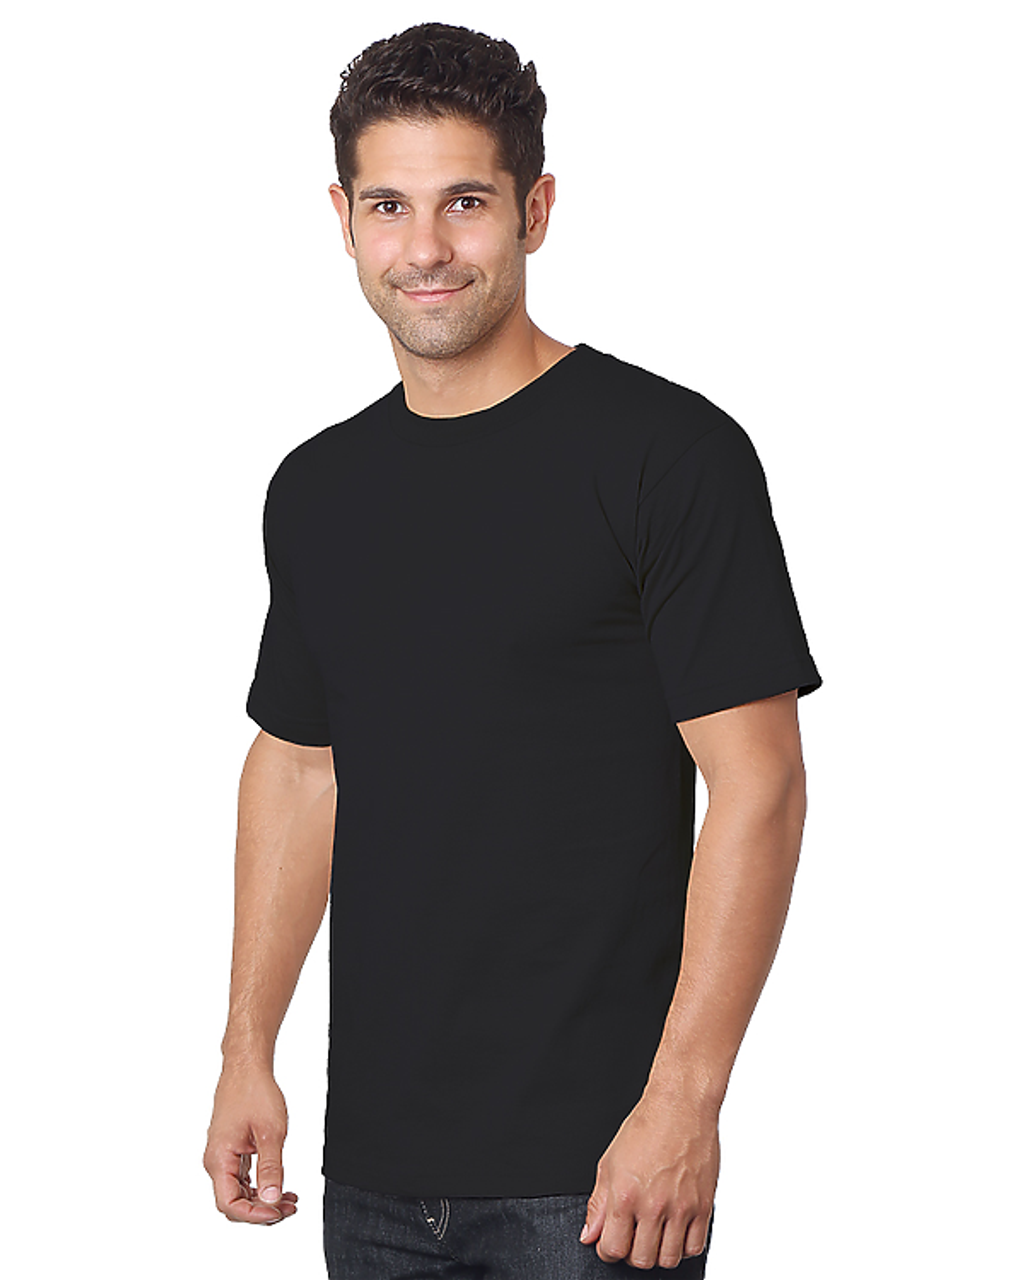 MADE IN USA HEAVYWEIGHT 6.1 OZ. COMBED RING-SPUN SOFT TEE [S-3XL]